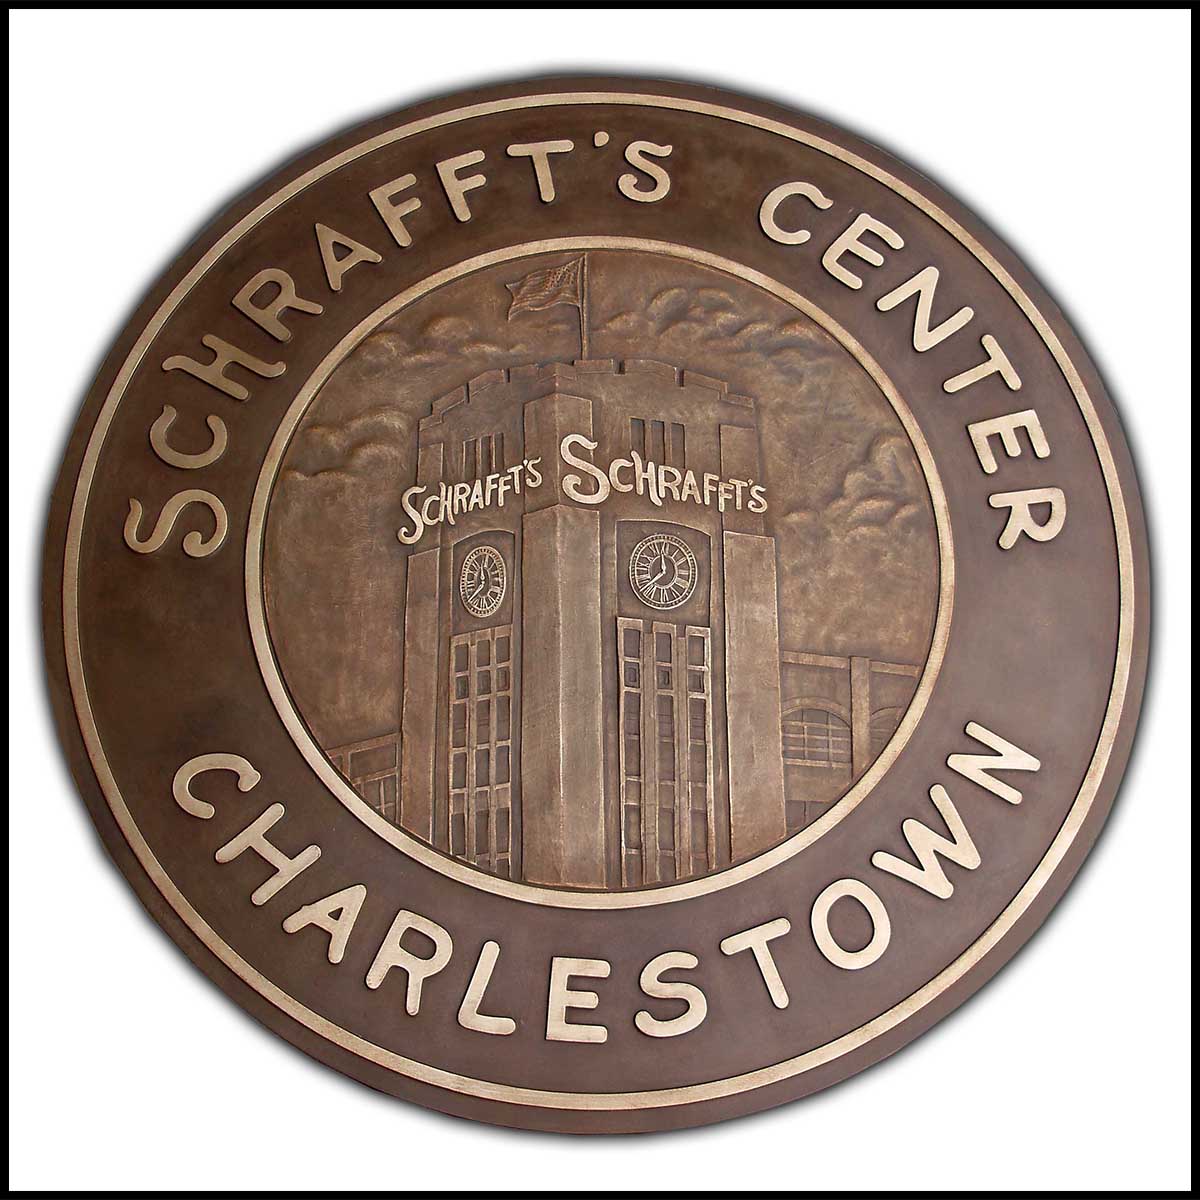 photo of bronze floor medallion with relief sculpture of Schrafft's building and text